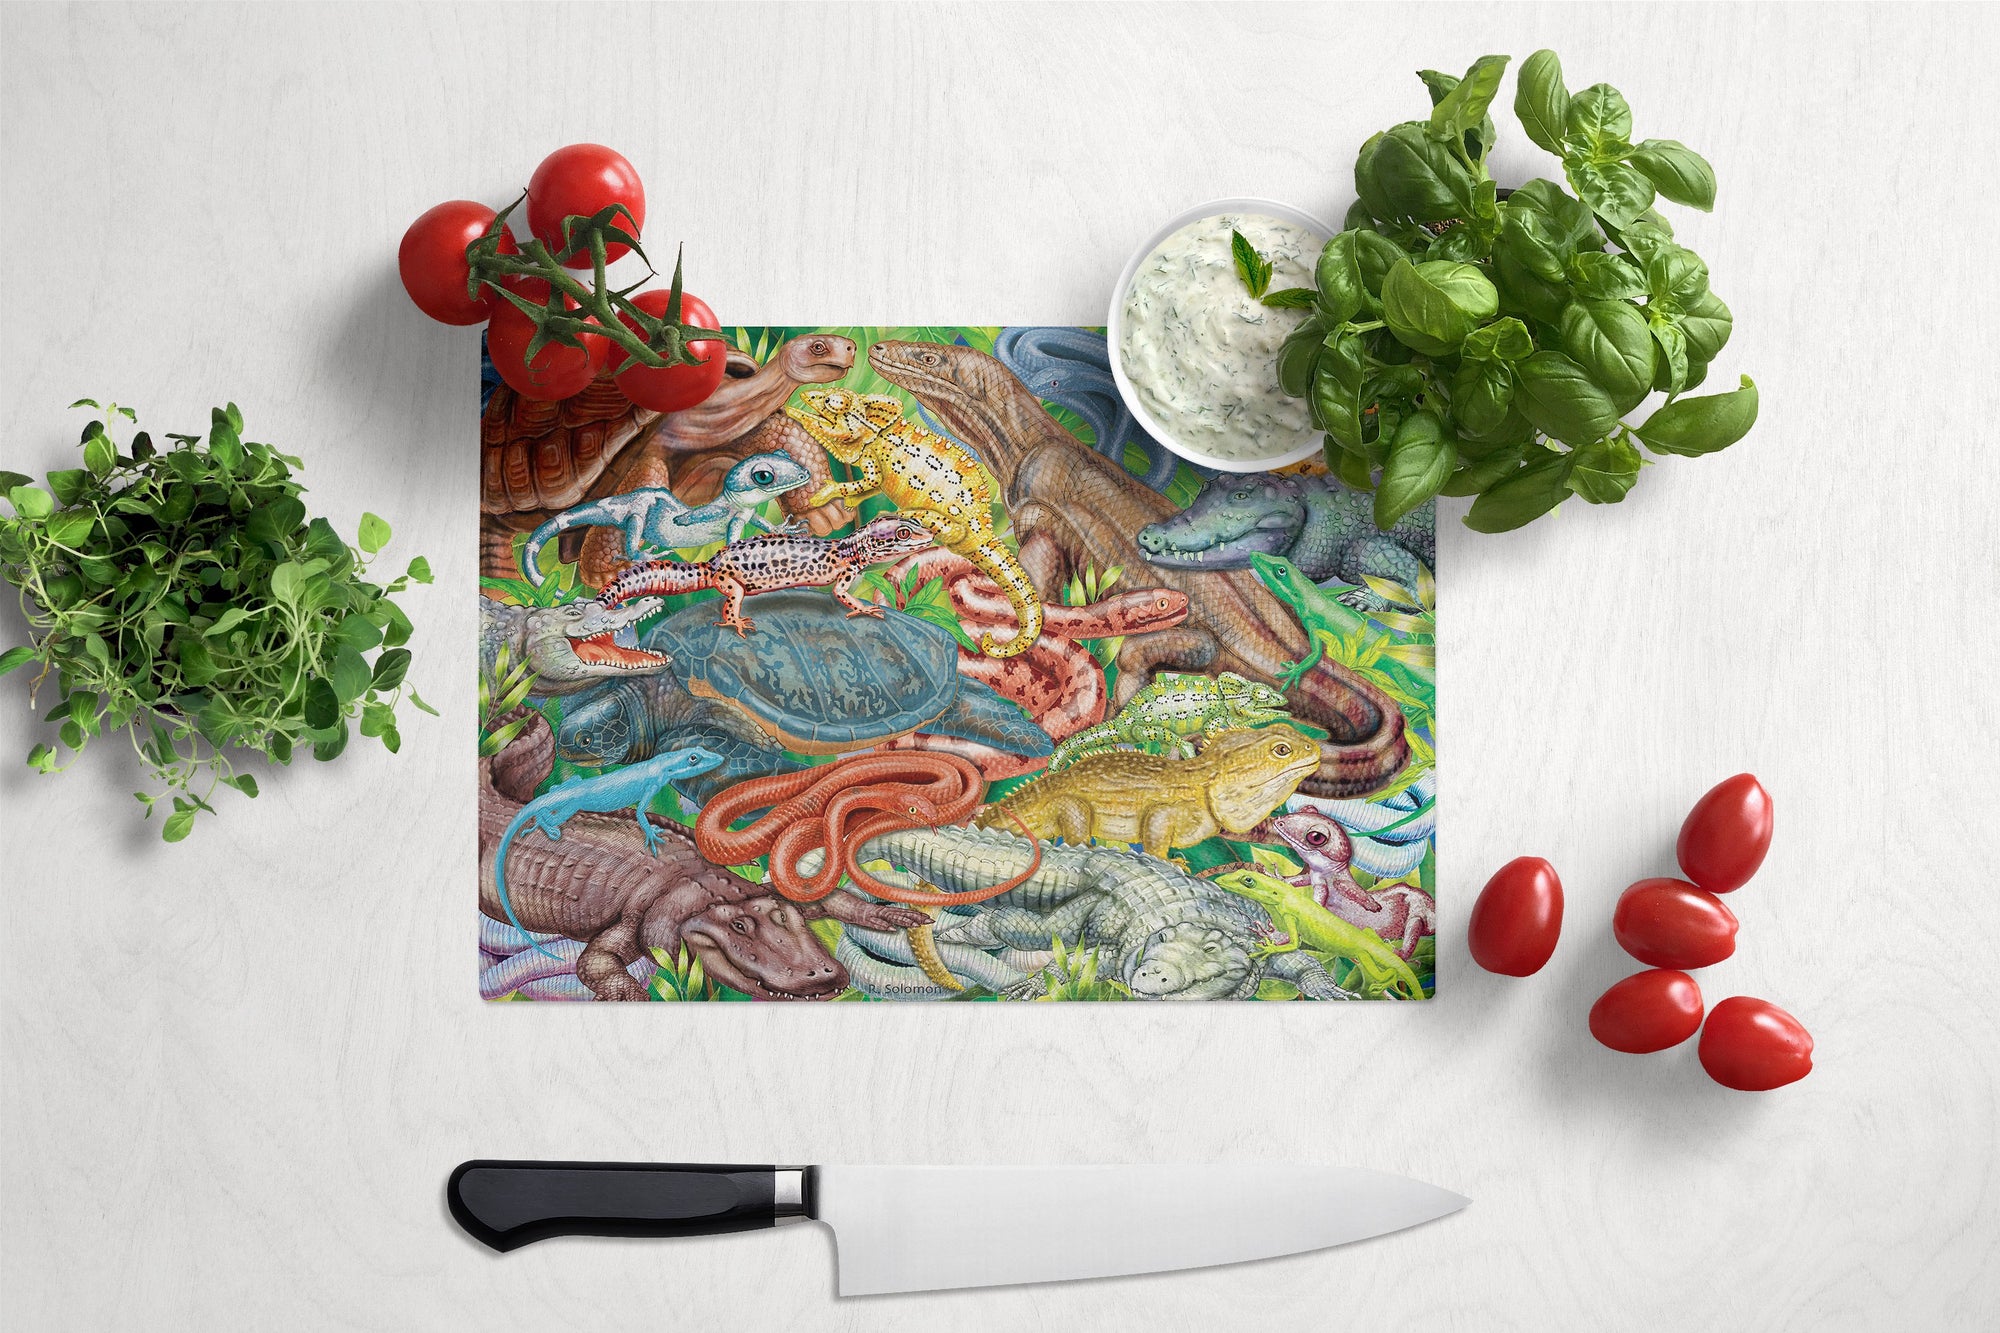 Scales and Tails, Snakes, Turtle, Reptiles Glass Cutting Board Large PRS4034LCB by Caroline's Treasures